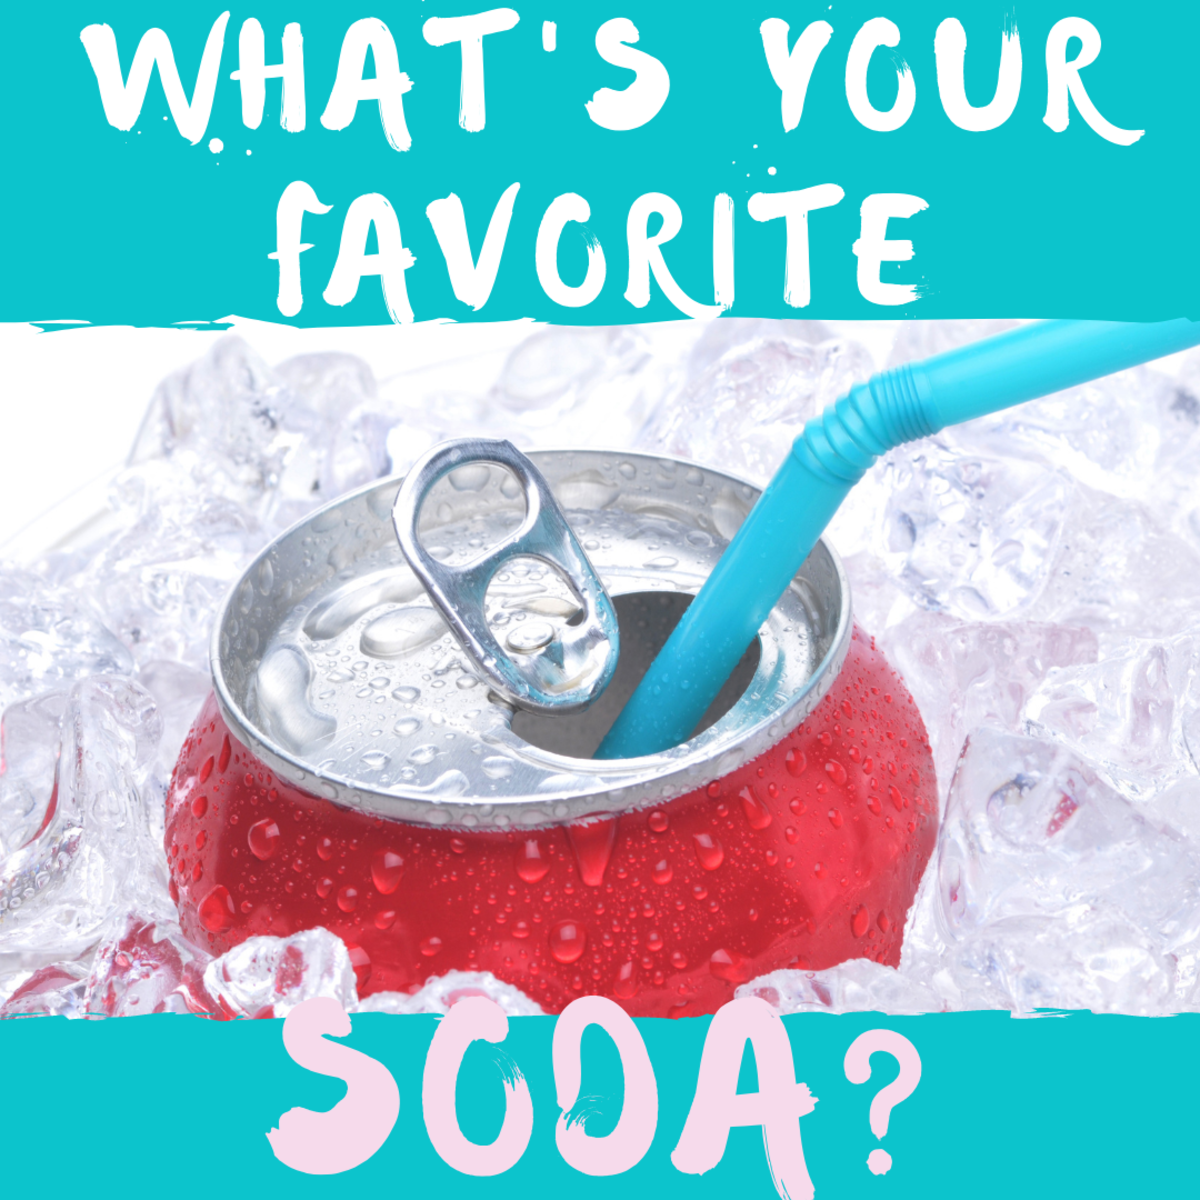 Or do you prefer seltzer or sparkling water?